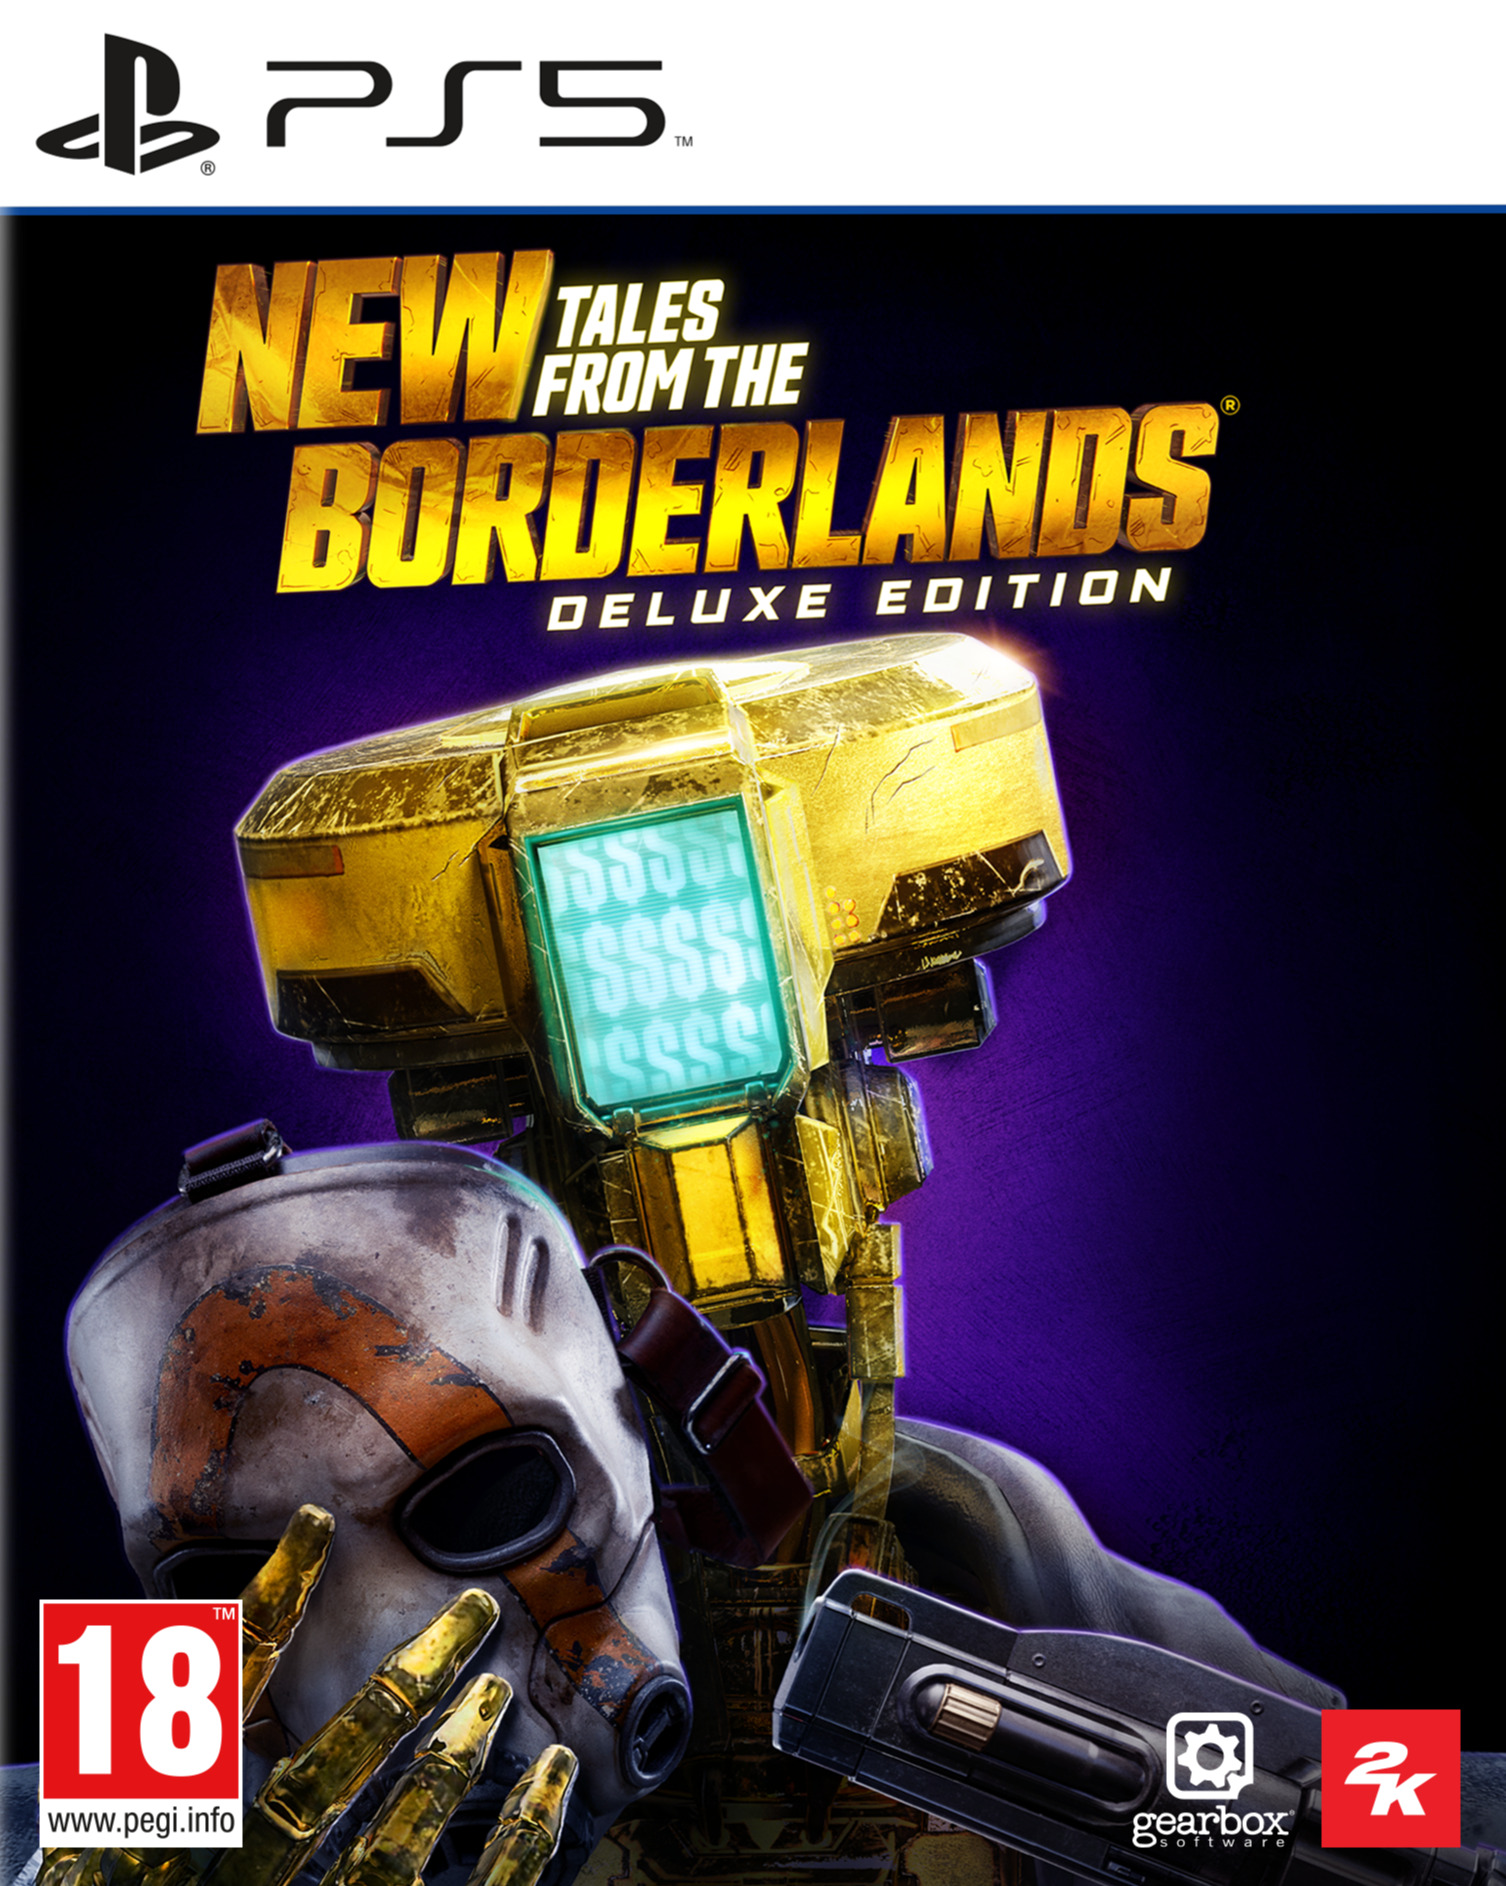 New Tales from the Borderlands - Deluxe Edition